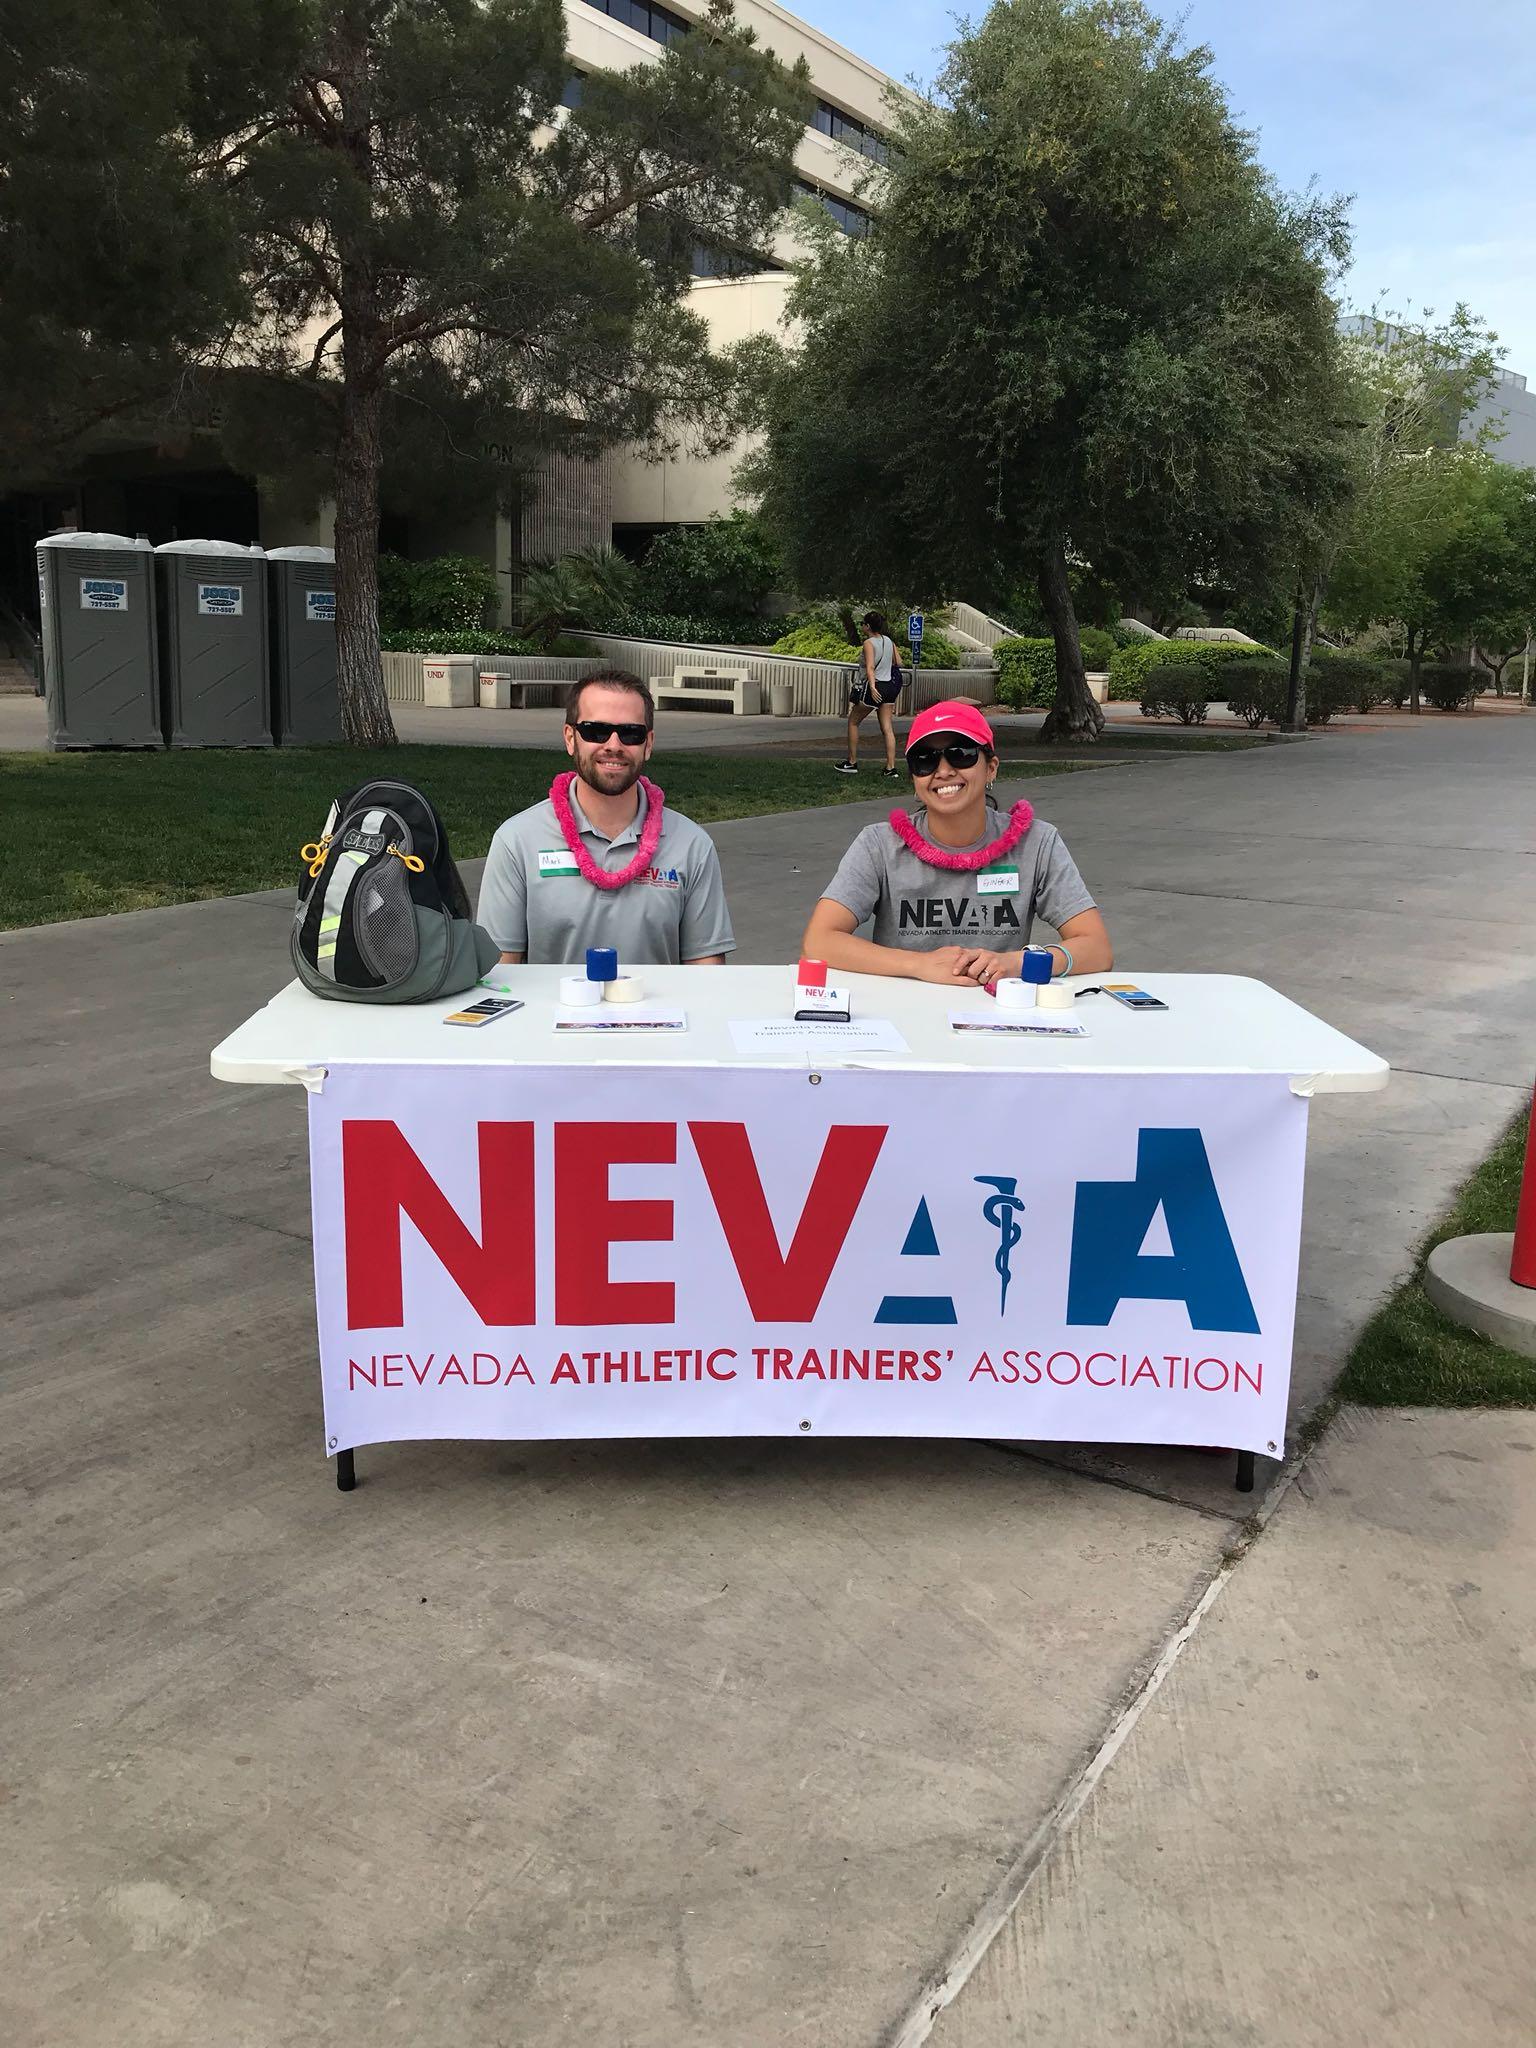 Nevada Athletic Trainers' Association volunteers at Girls on the Run event.